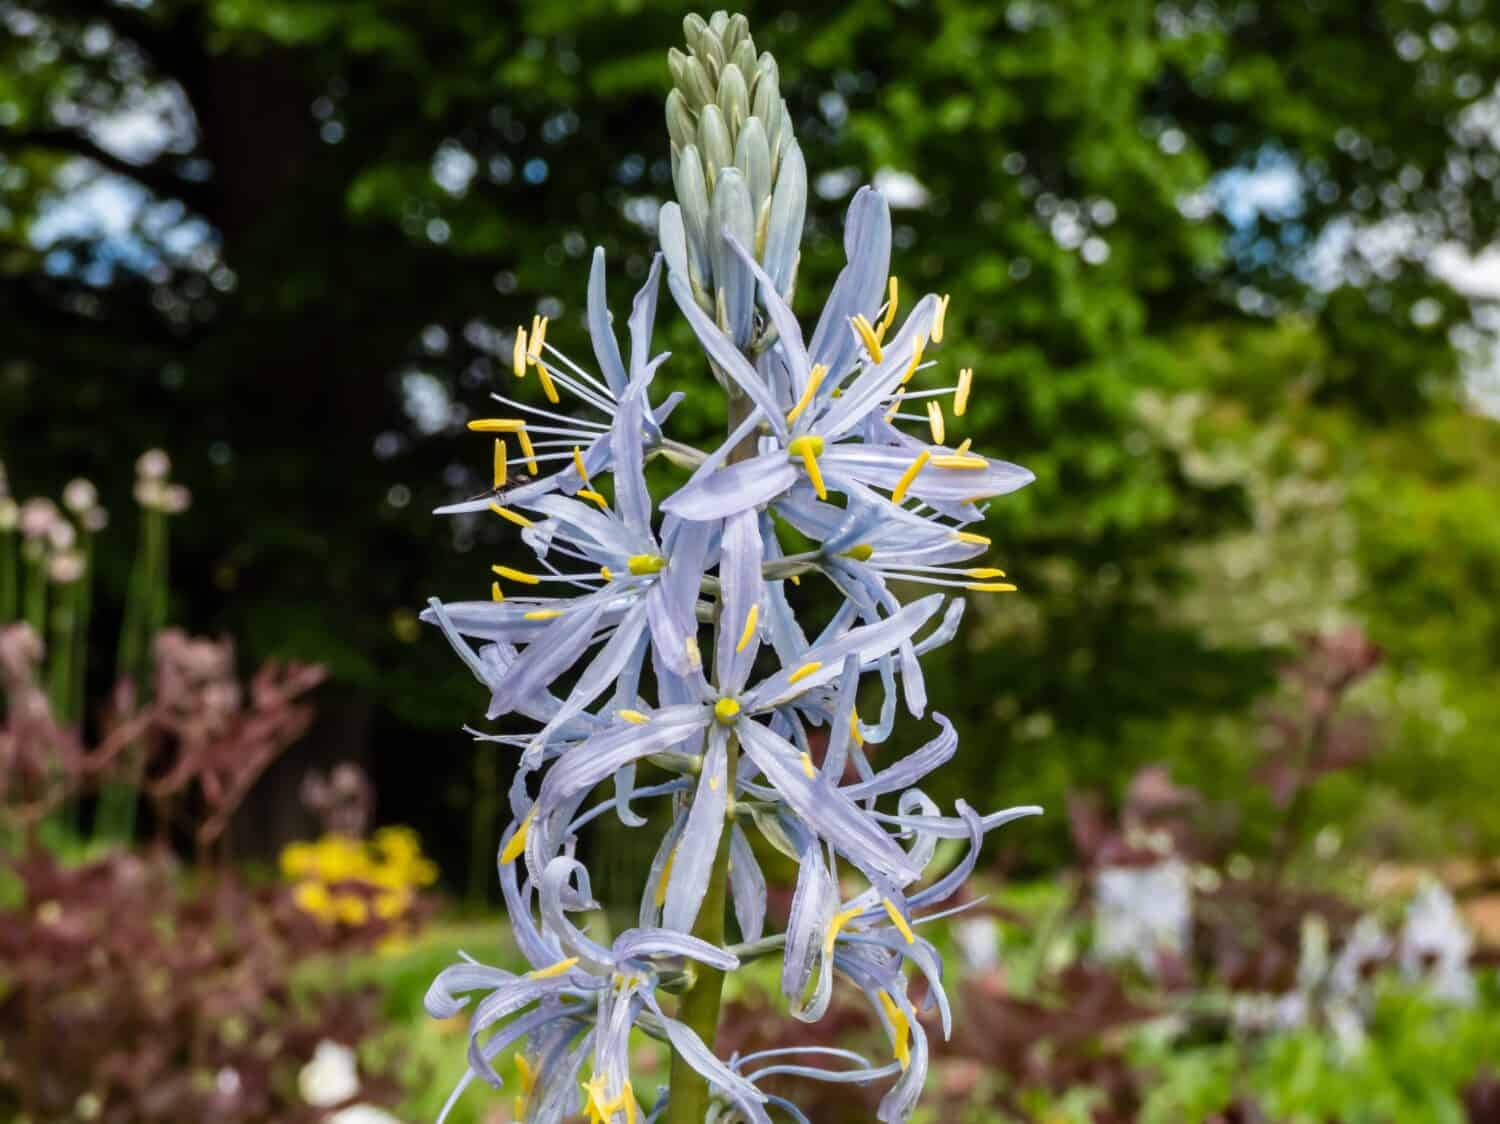 Close-up shot of the Cusick's camass (Camassia cusickii) flowering with sky blue to white flowers with showy, yellow anthers in the garden as ornamental plant in summer